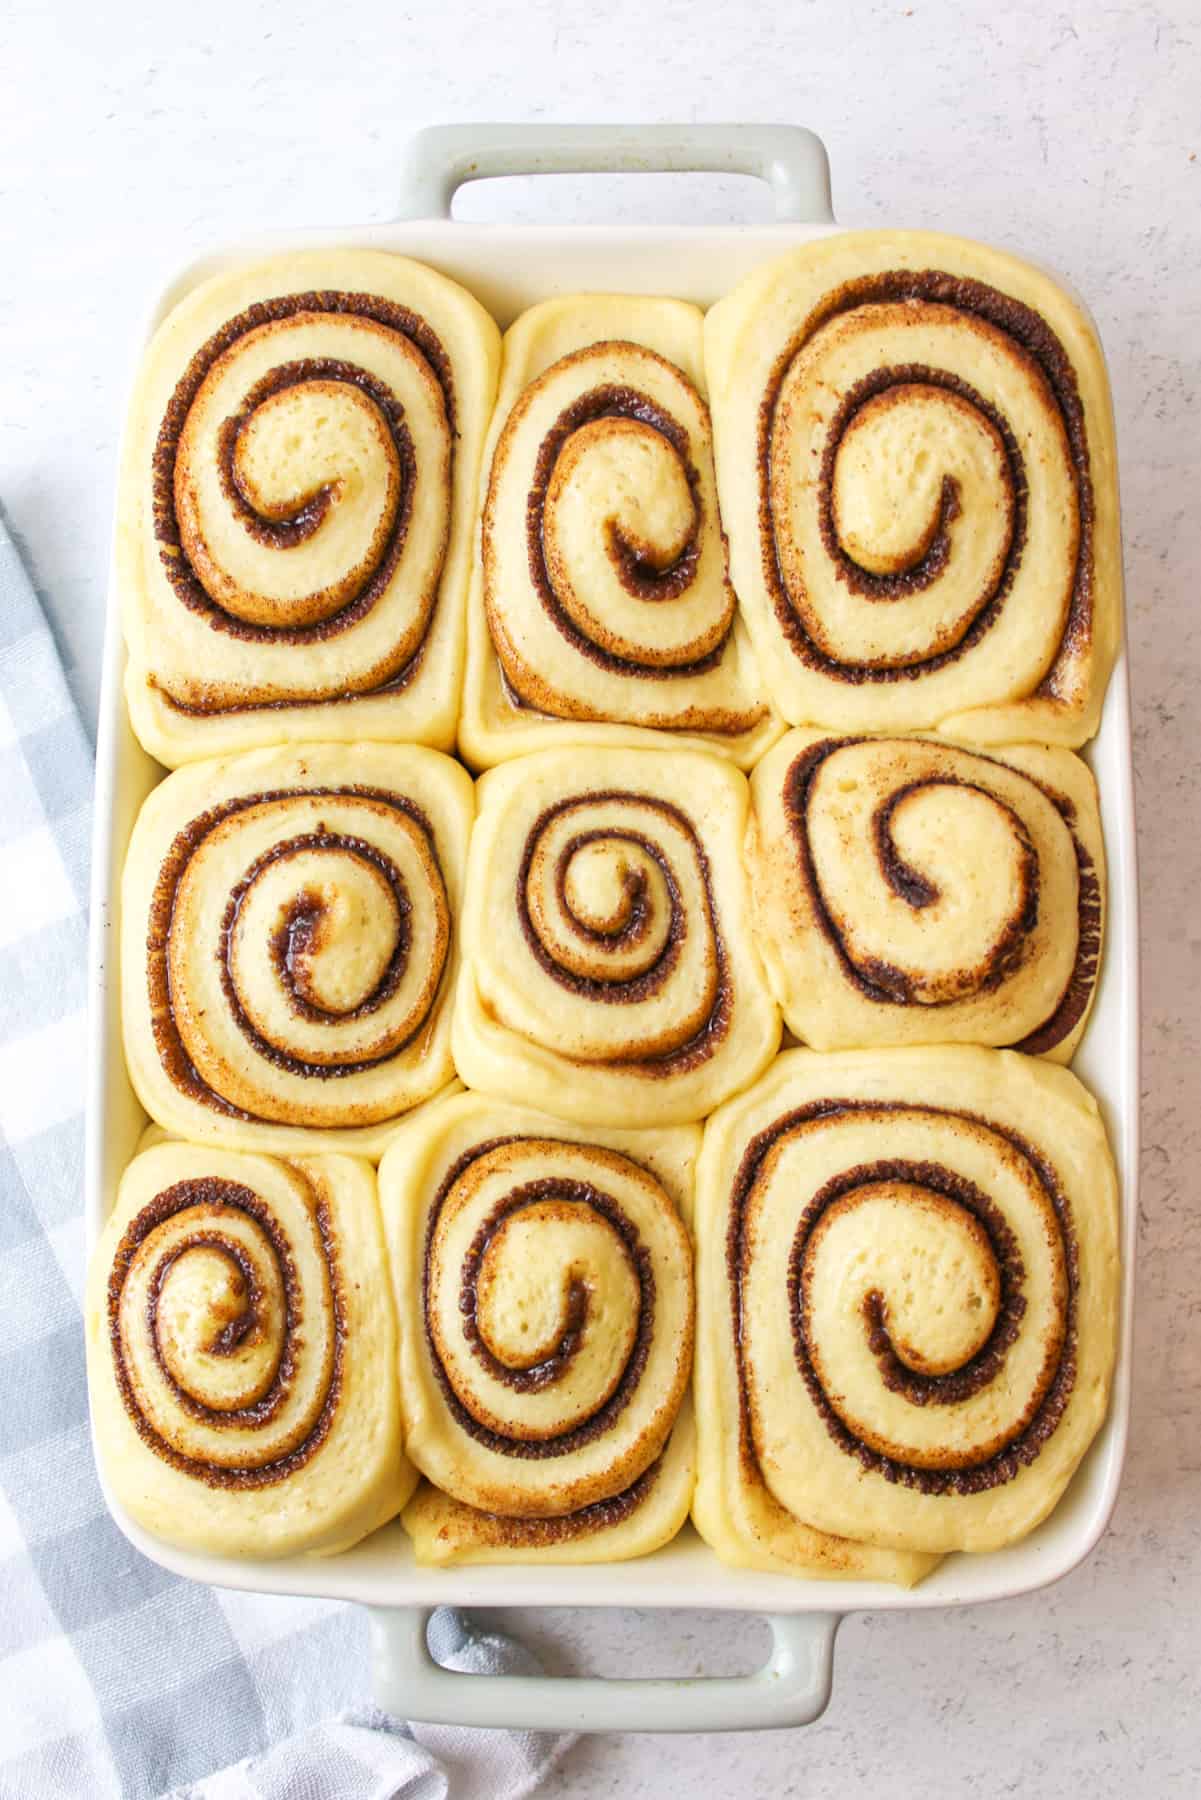 doubled in size and proofed cinnamon rolls in a baking dish.